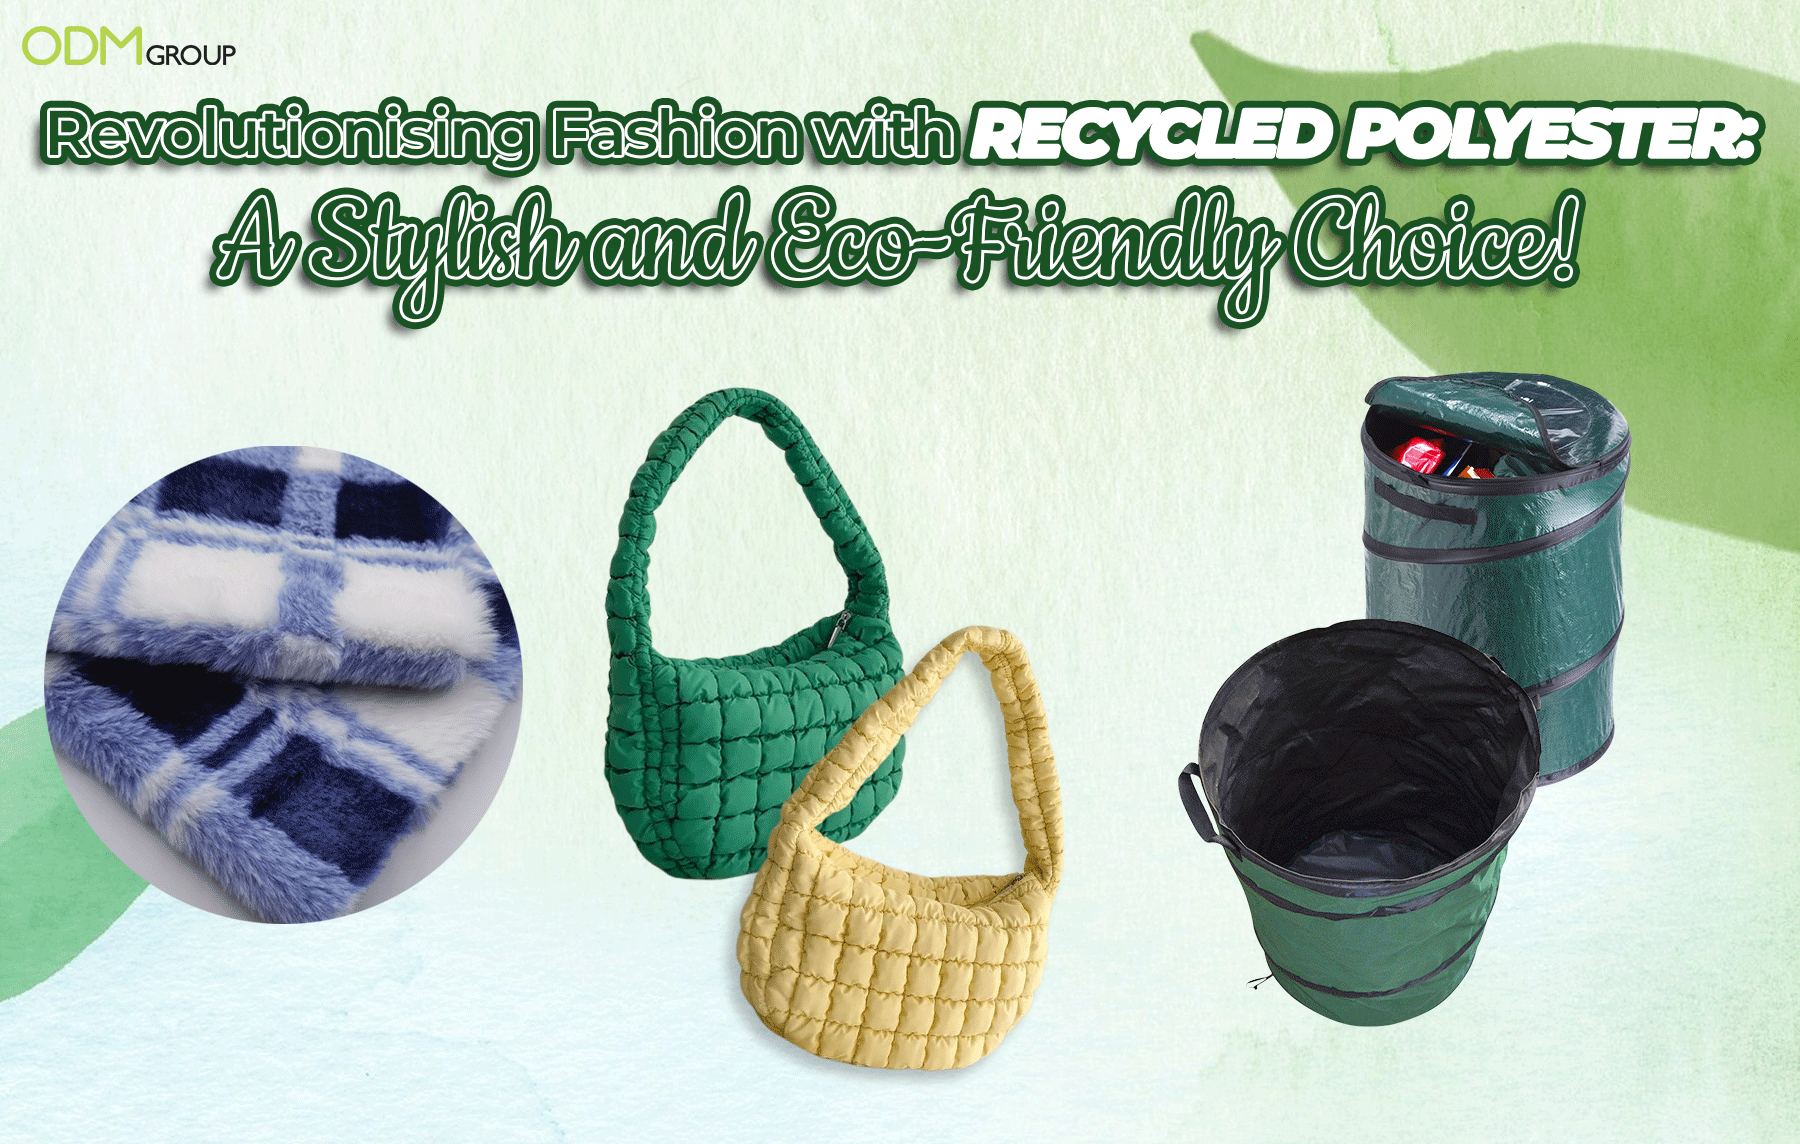 What is recycled polyester - OneFrame